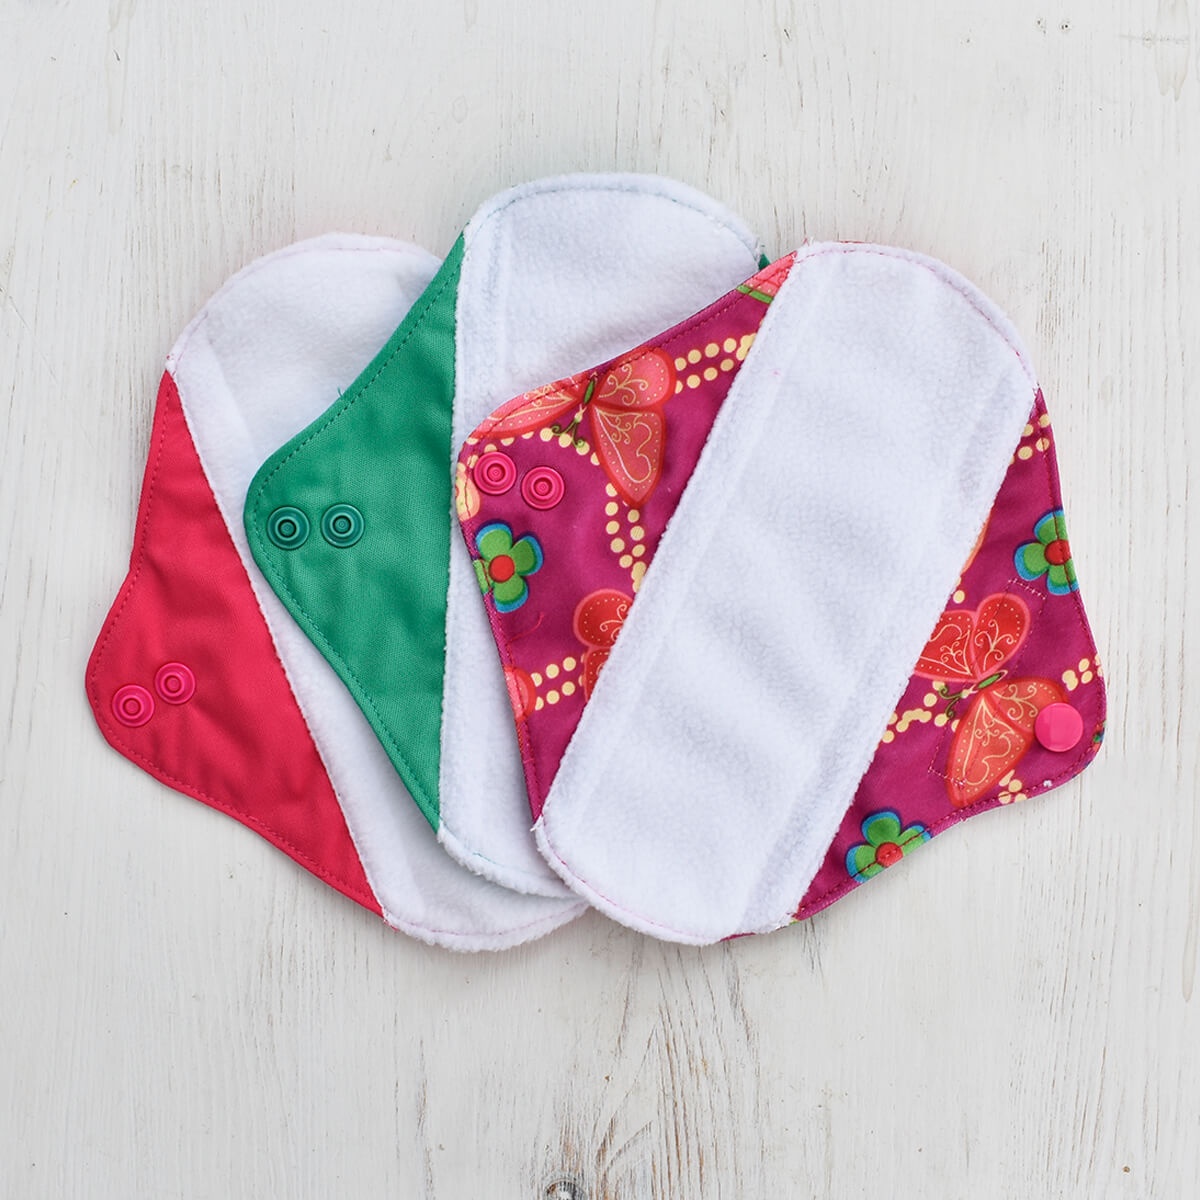 Earth Wise Girls Small Reusable Sanitary Pads - 3 Pack